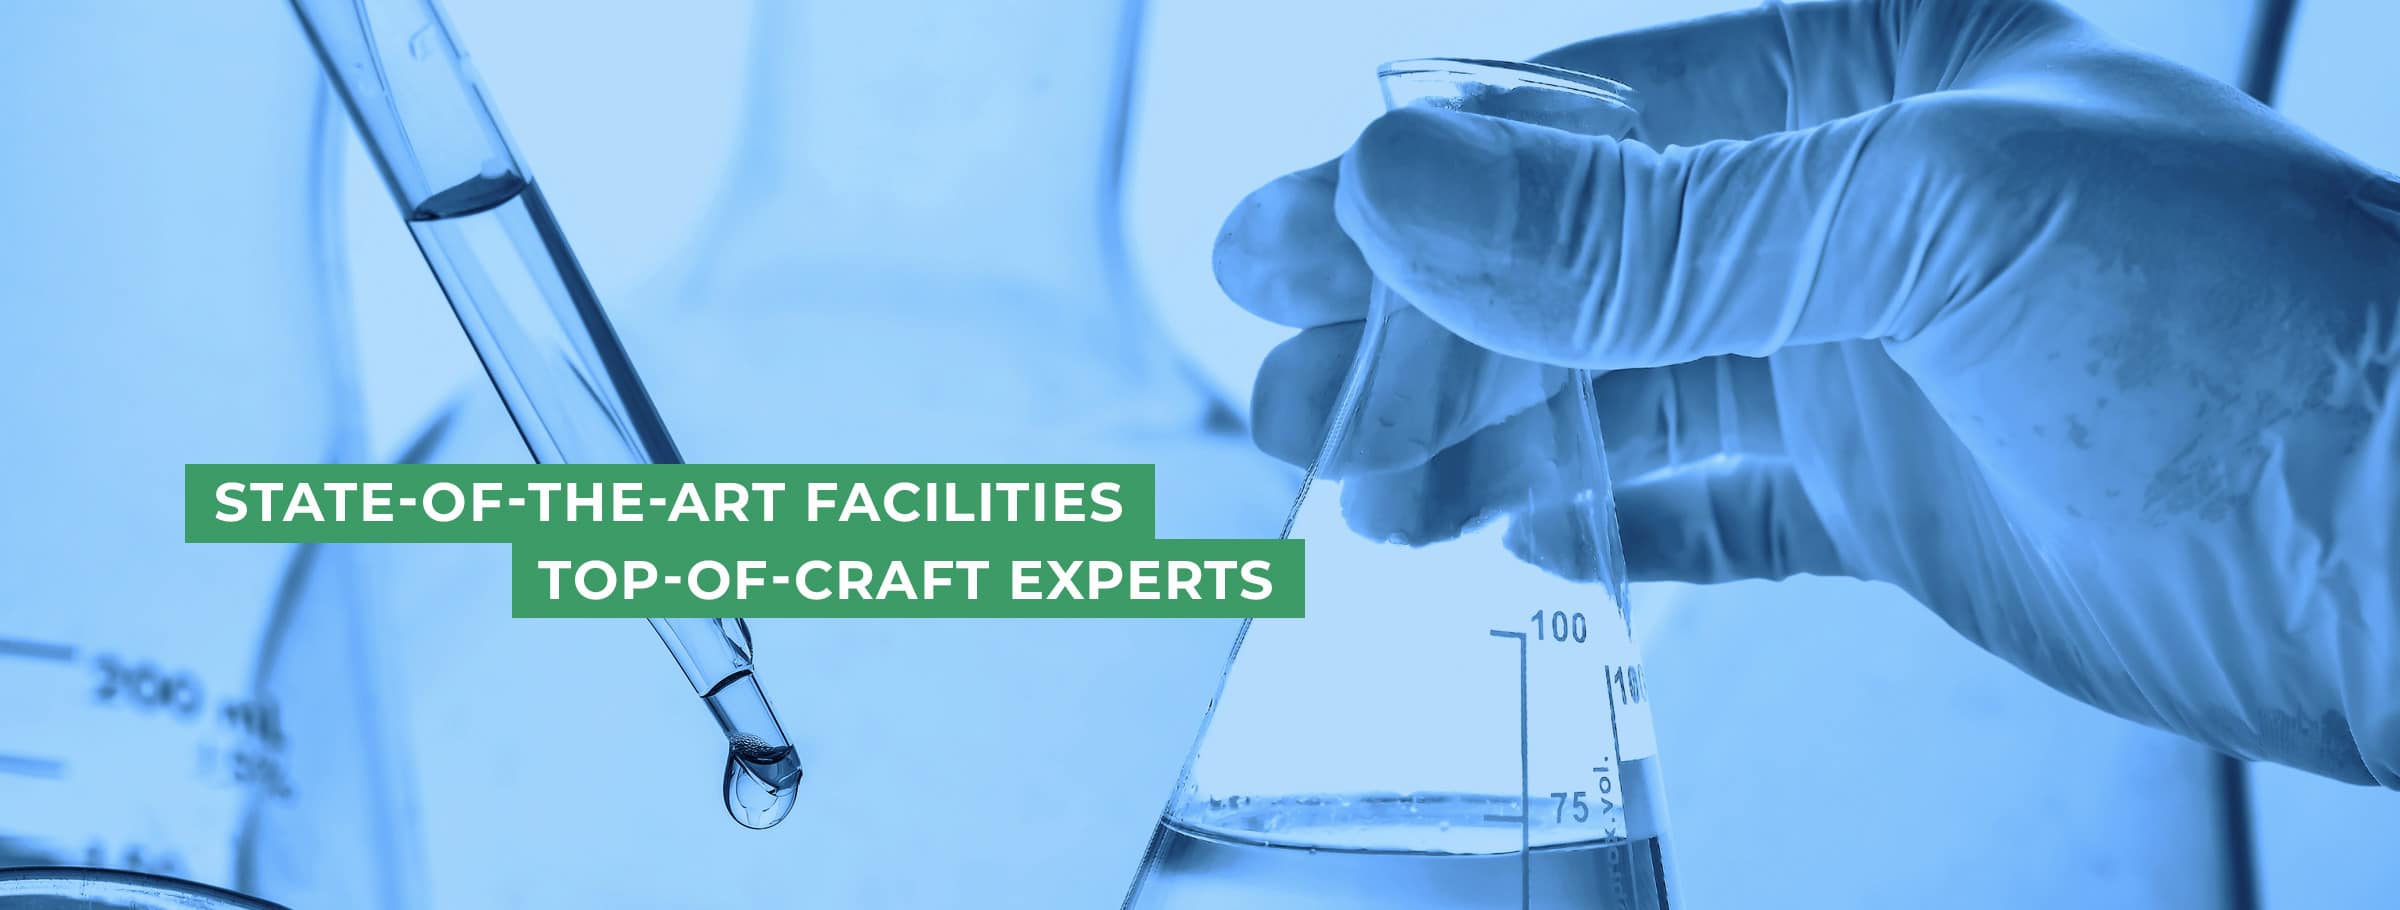 State-of-the-art facilities, top-of-craft experts